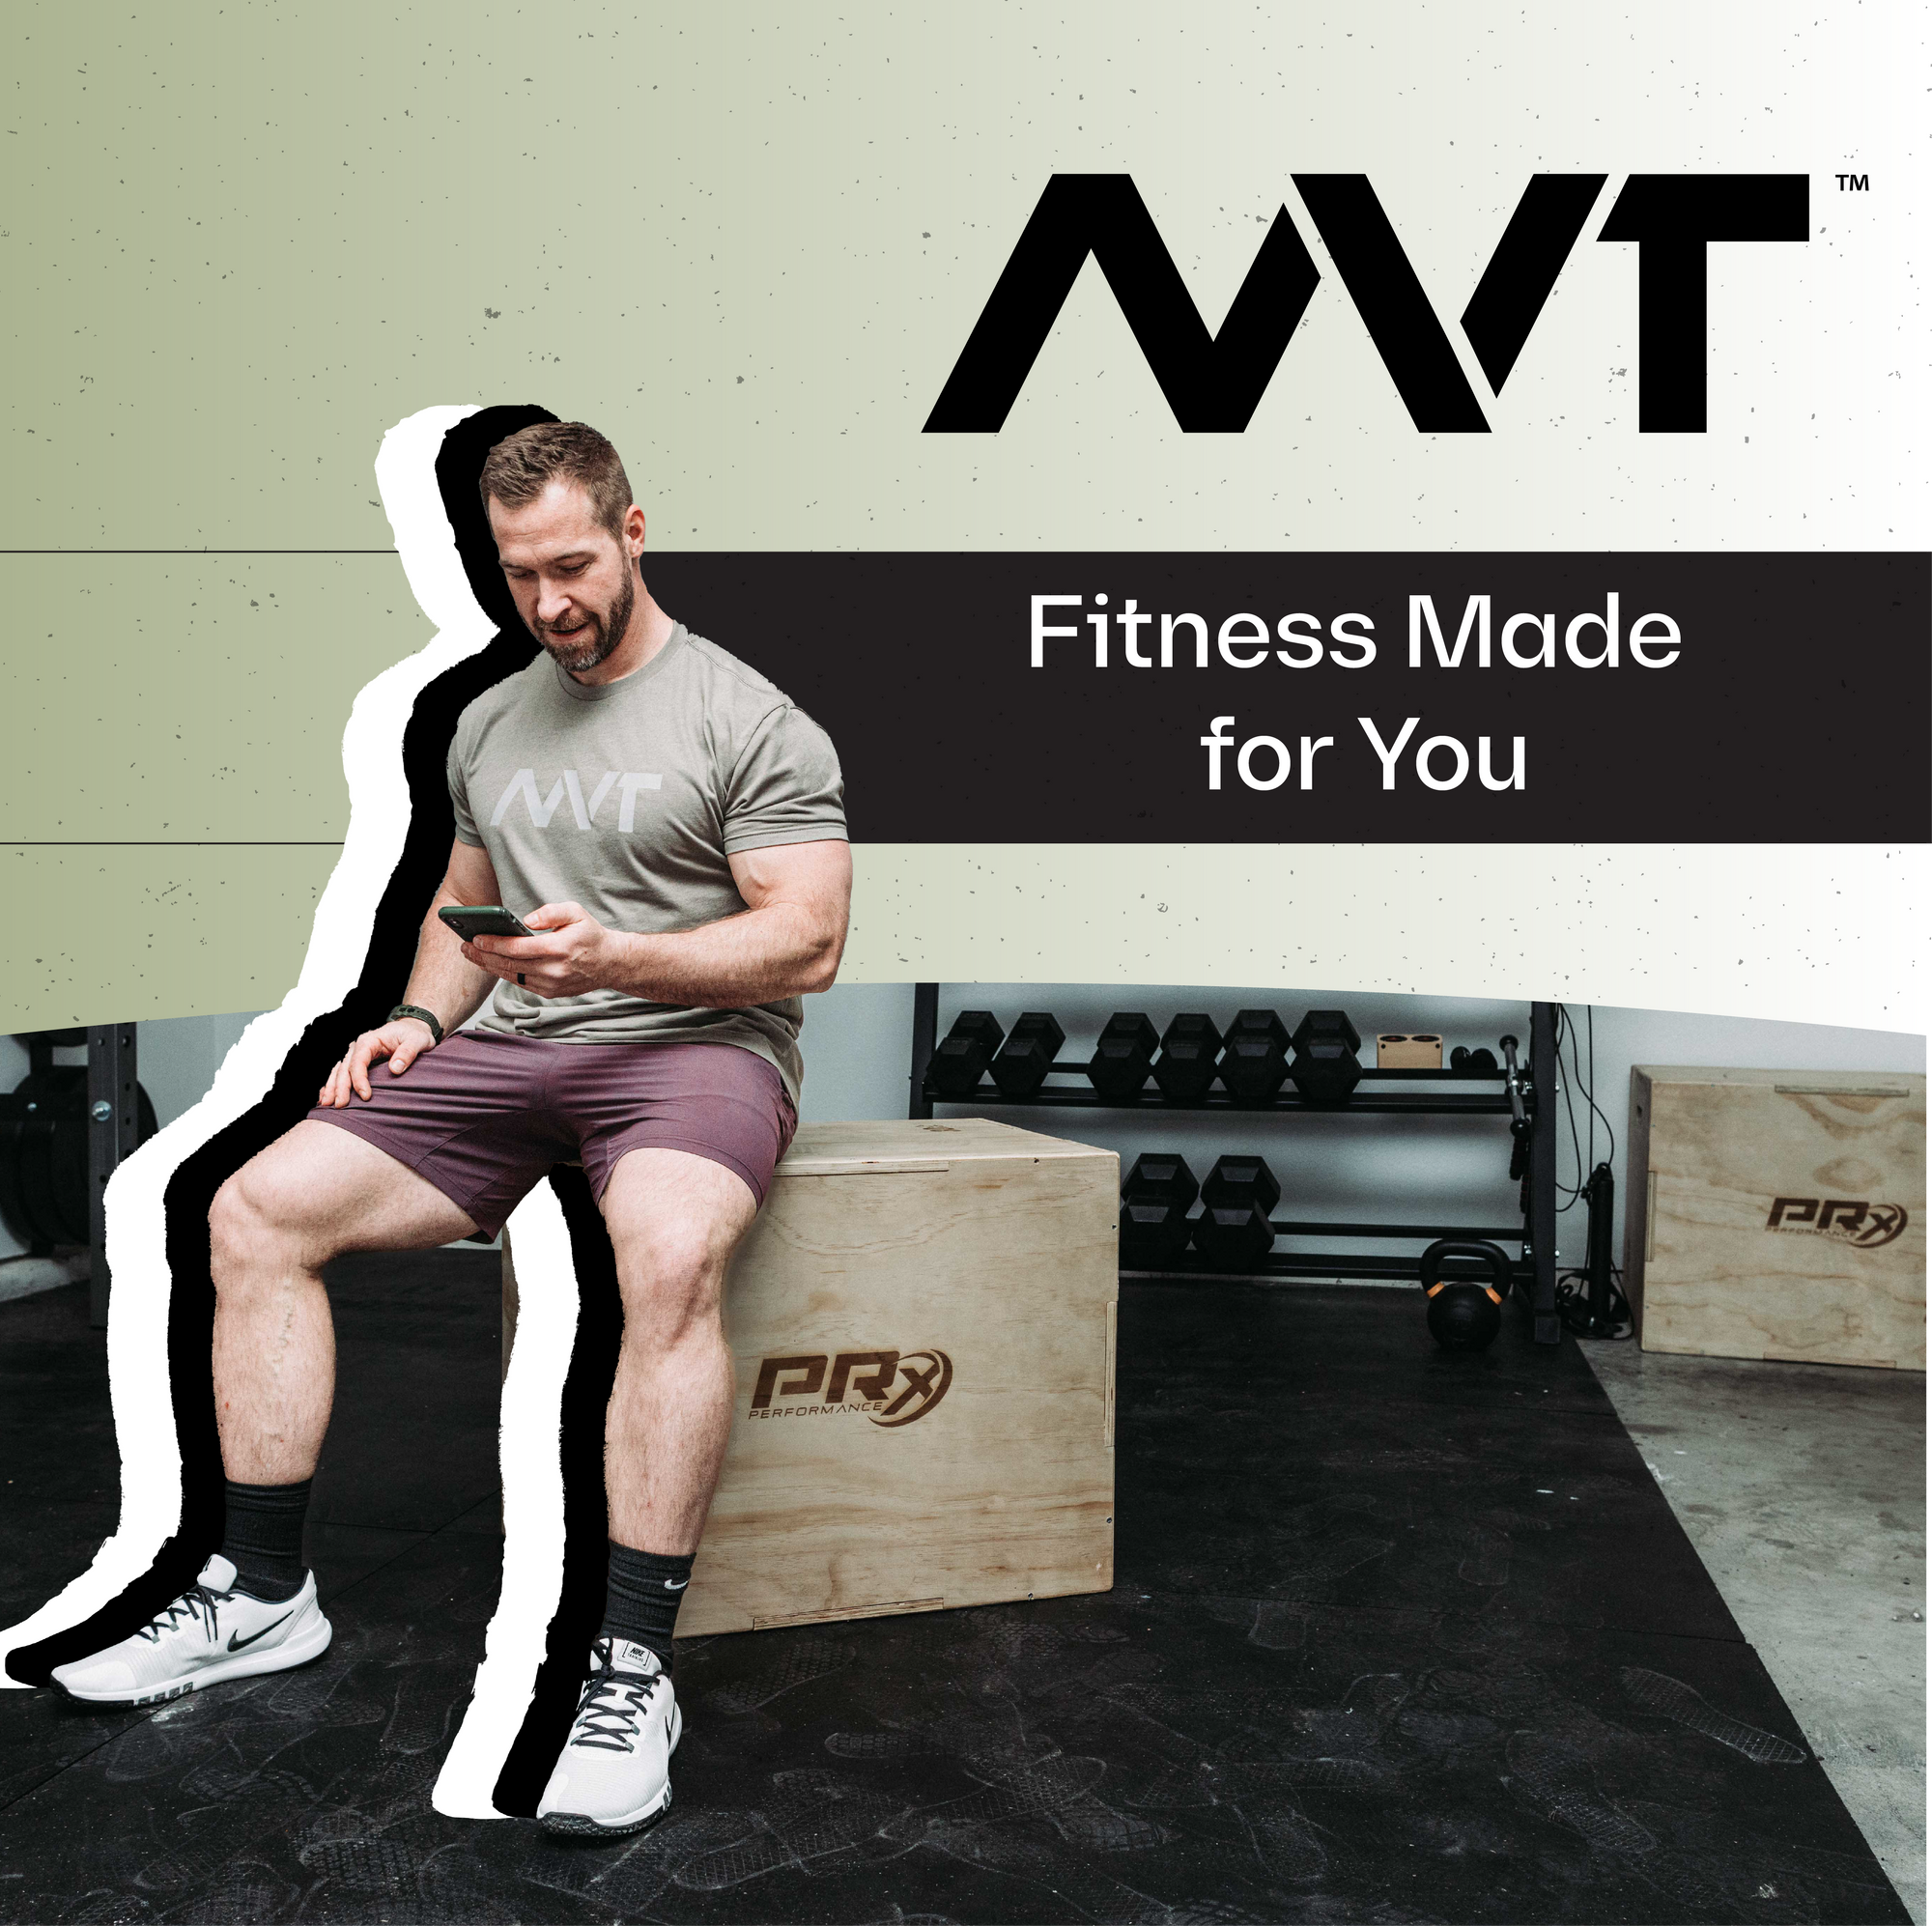 The MVT Fitness App: Fitness Made for You